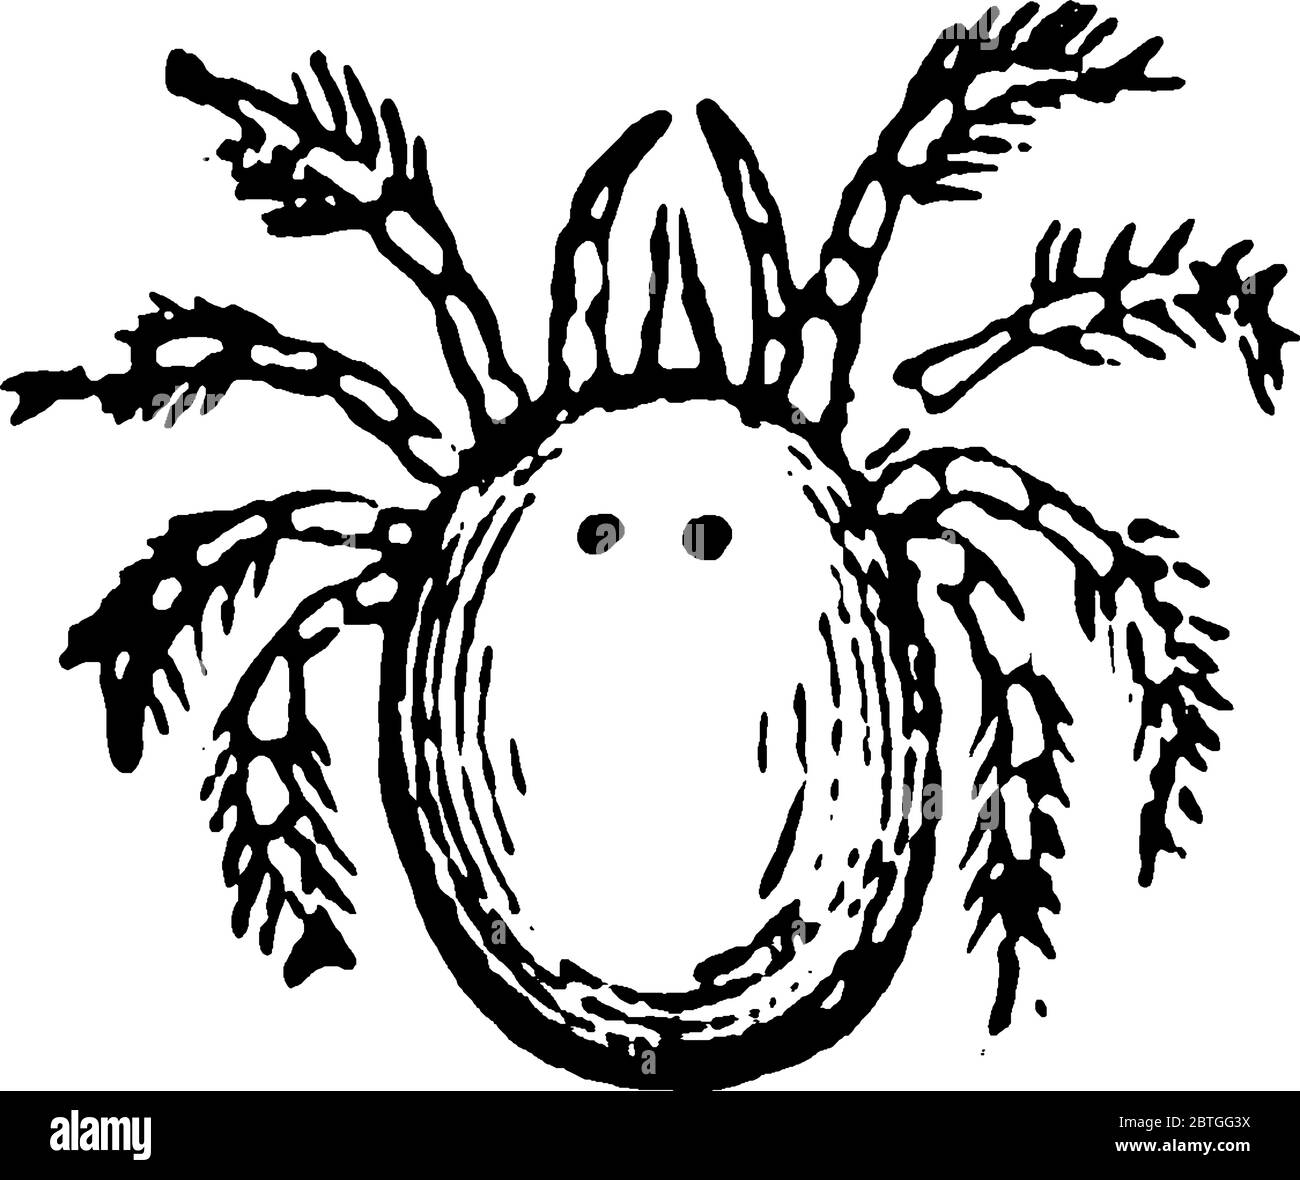 Mites are small arthropods belonging to the class Arachnida and the subclass Acari, vintage line drawing or engraving illustration. Stock Vector